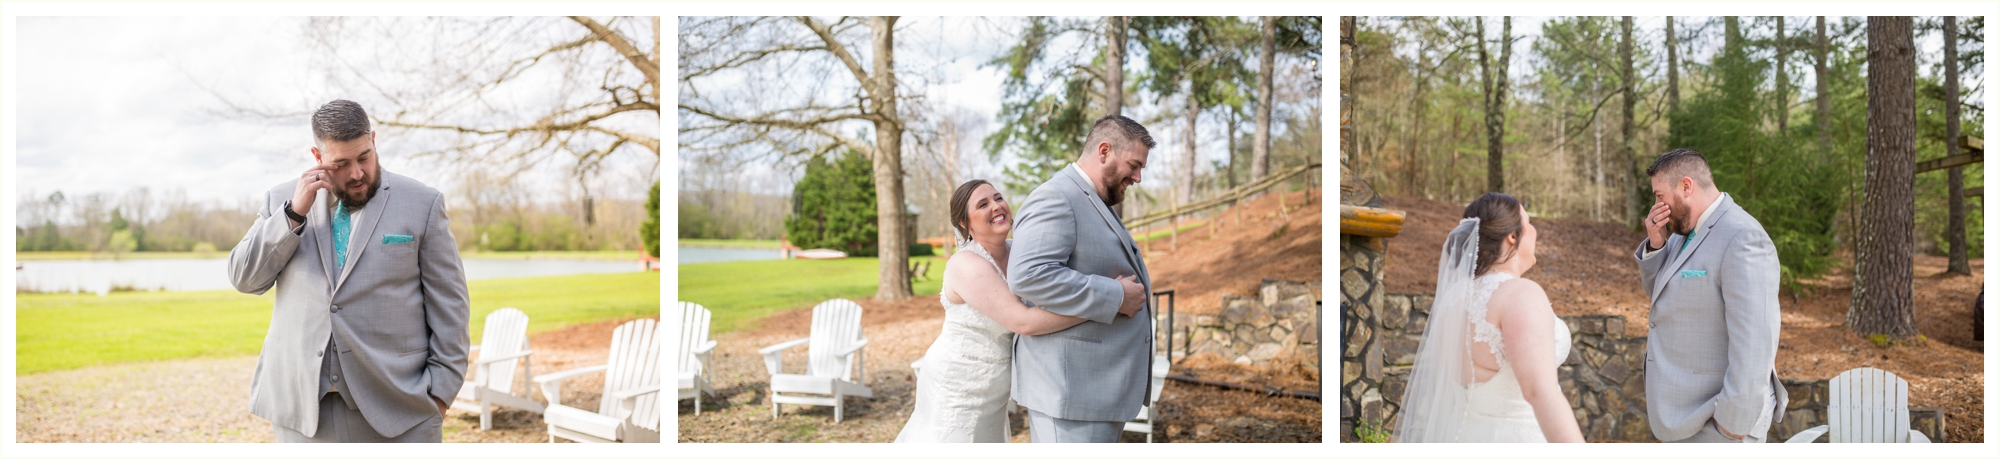 bride and groom share intimate emotional first look 